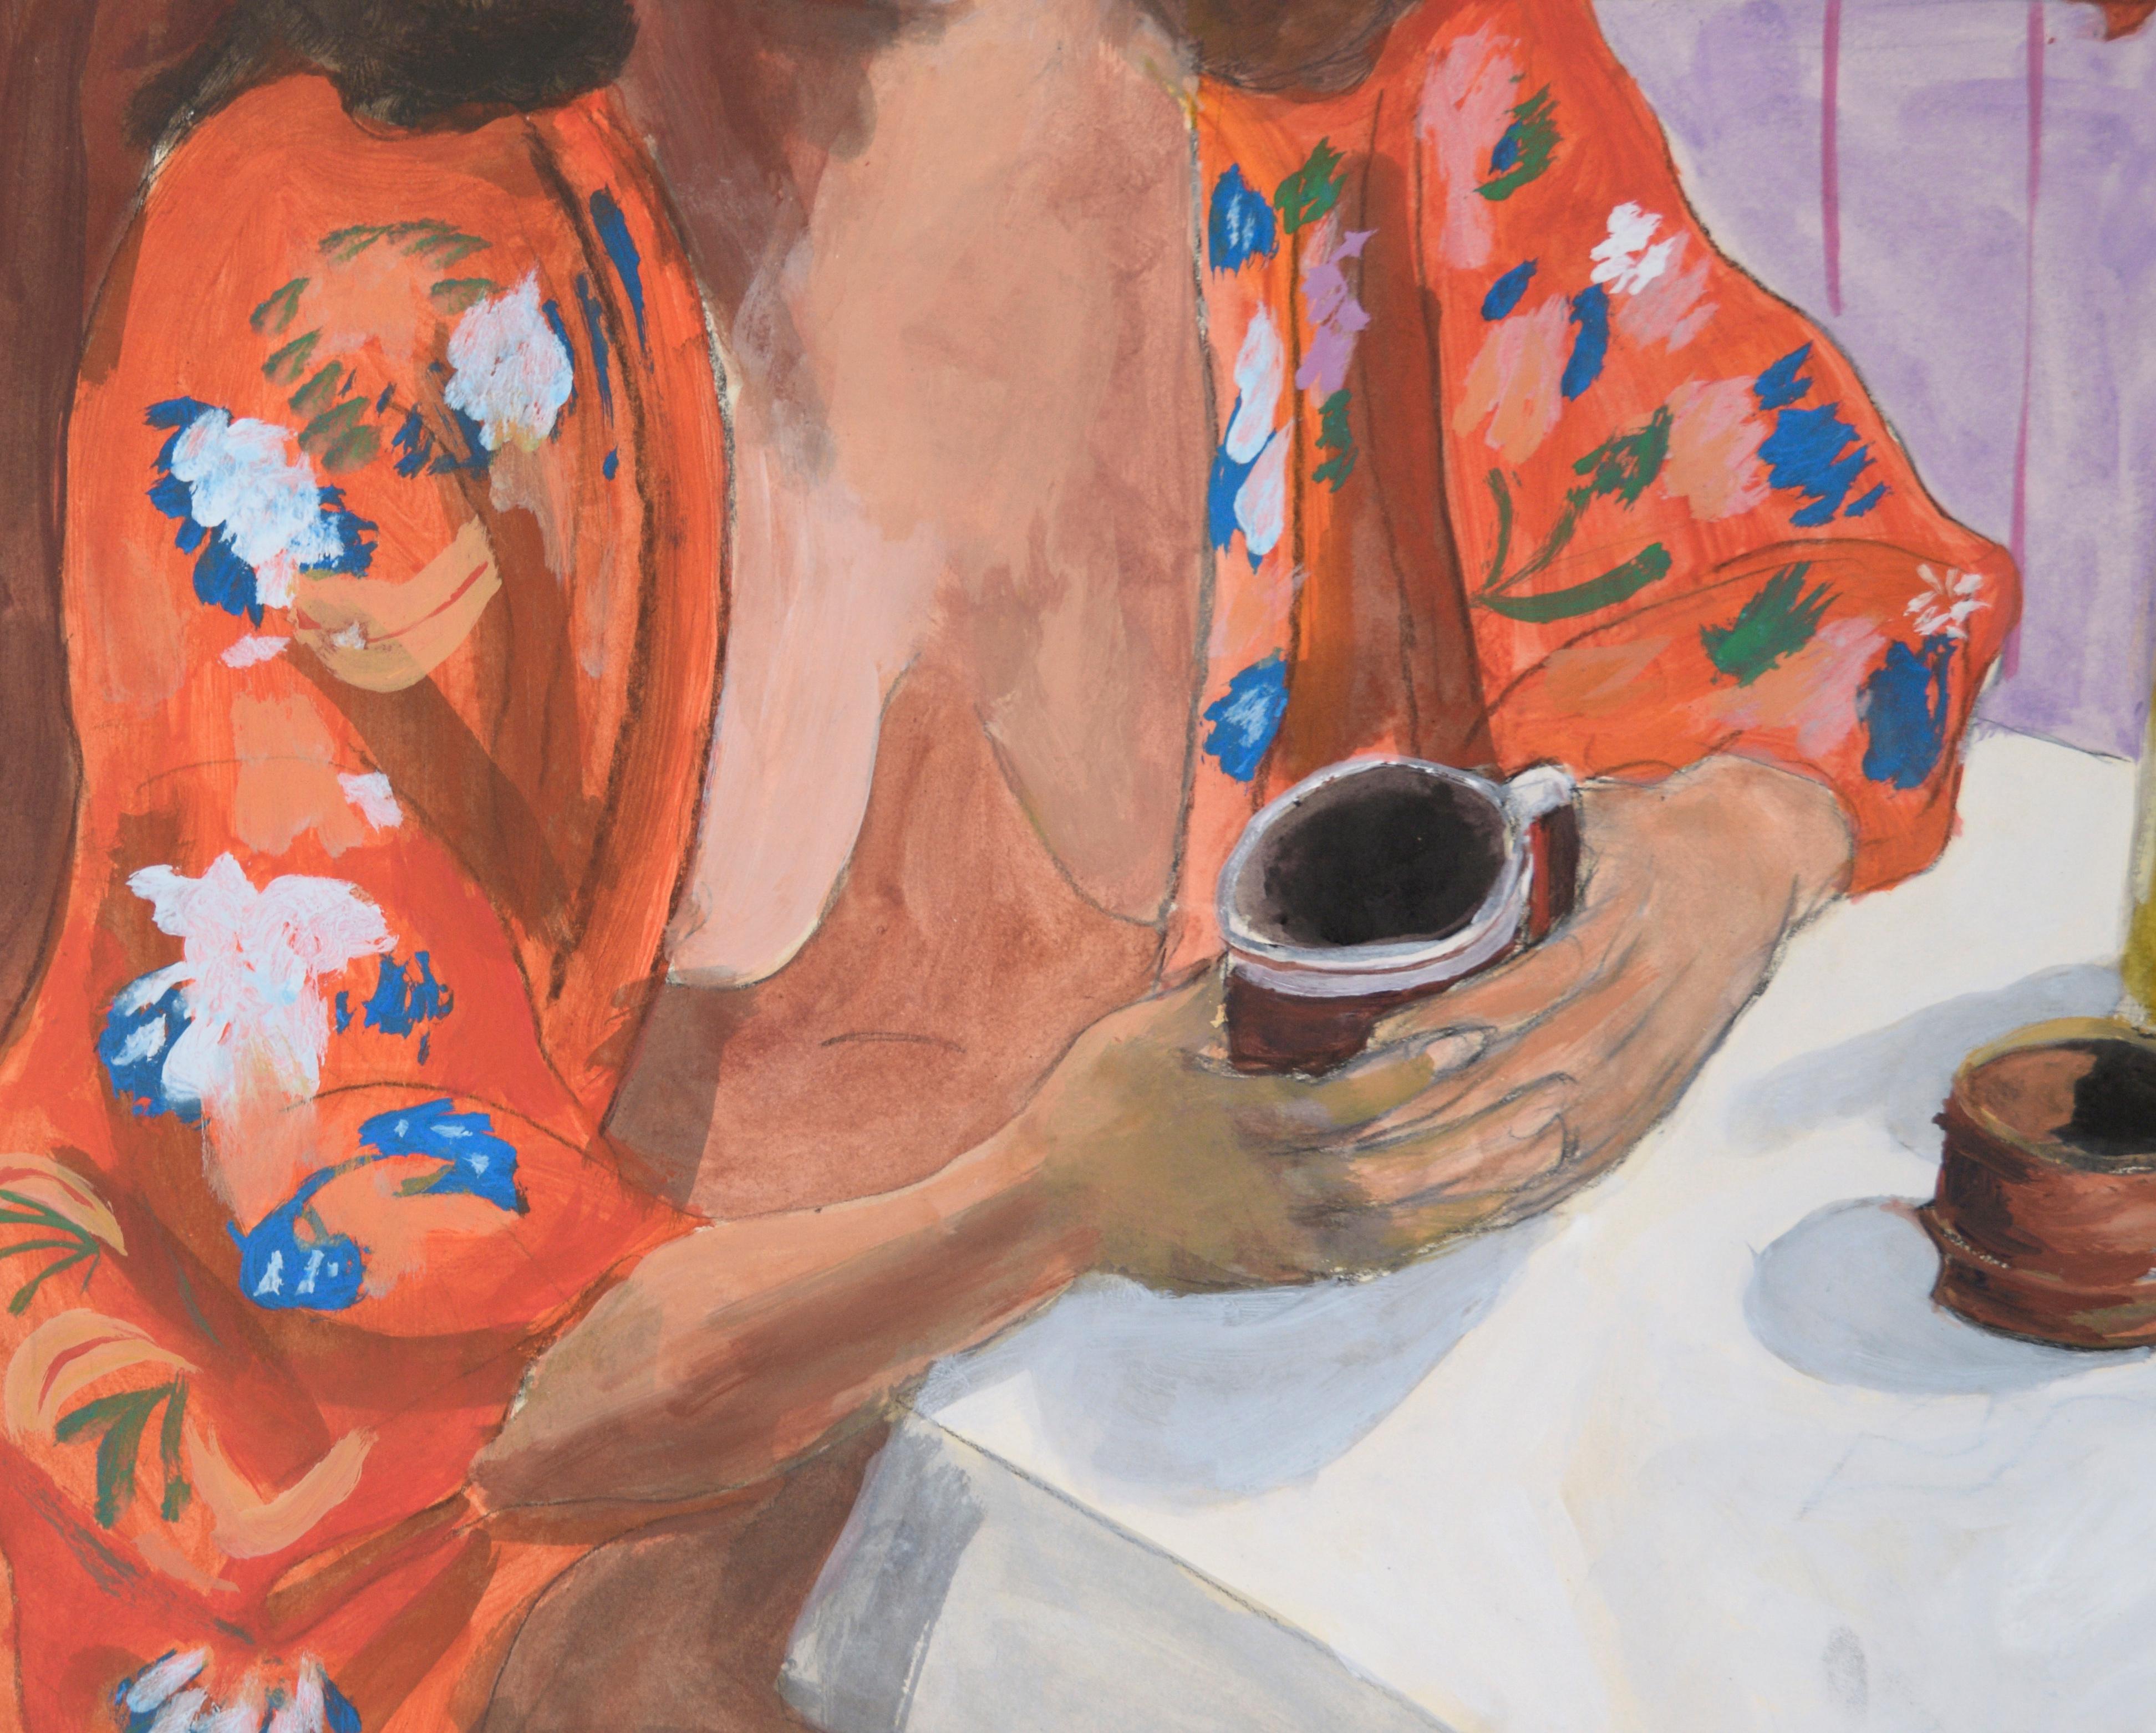 Slow Morning with Coffee - Model at a Table in Acrylic on Paper

Colorful painting of a woman drinking coffee by acclaimed bluegrass musician and San Francisco artist Katherine 